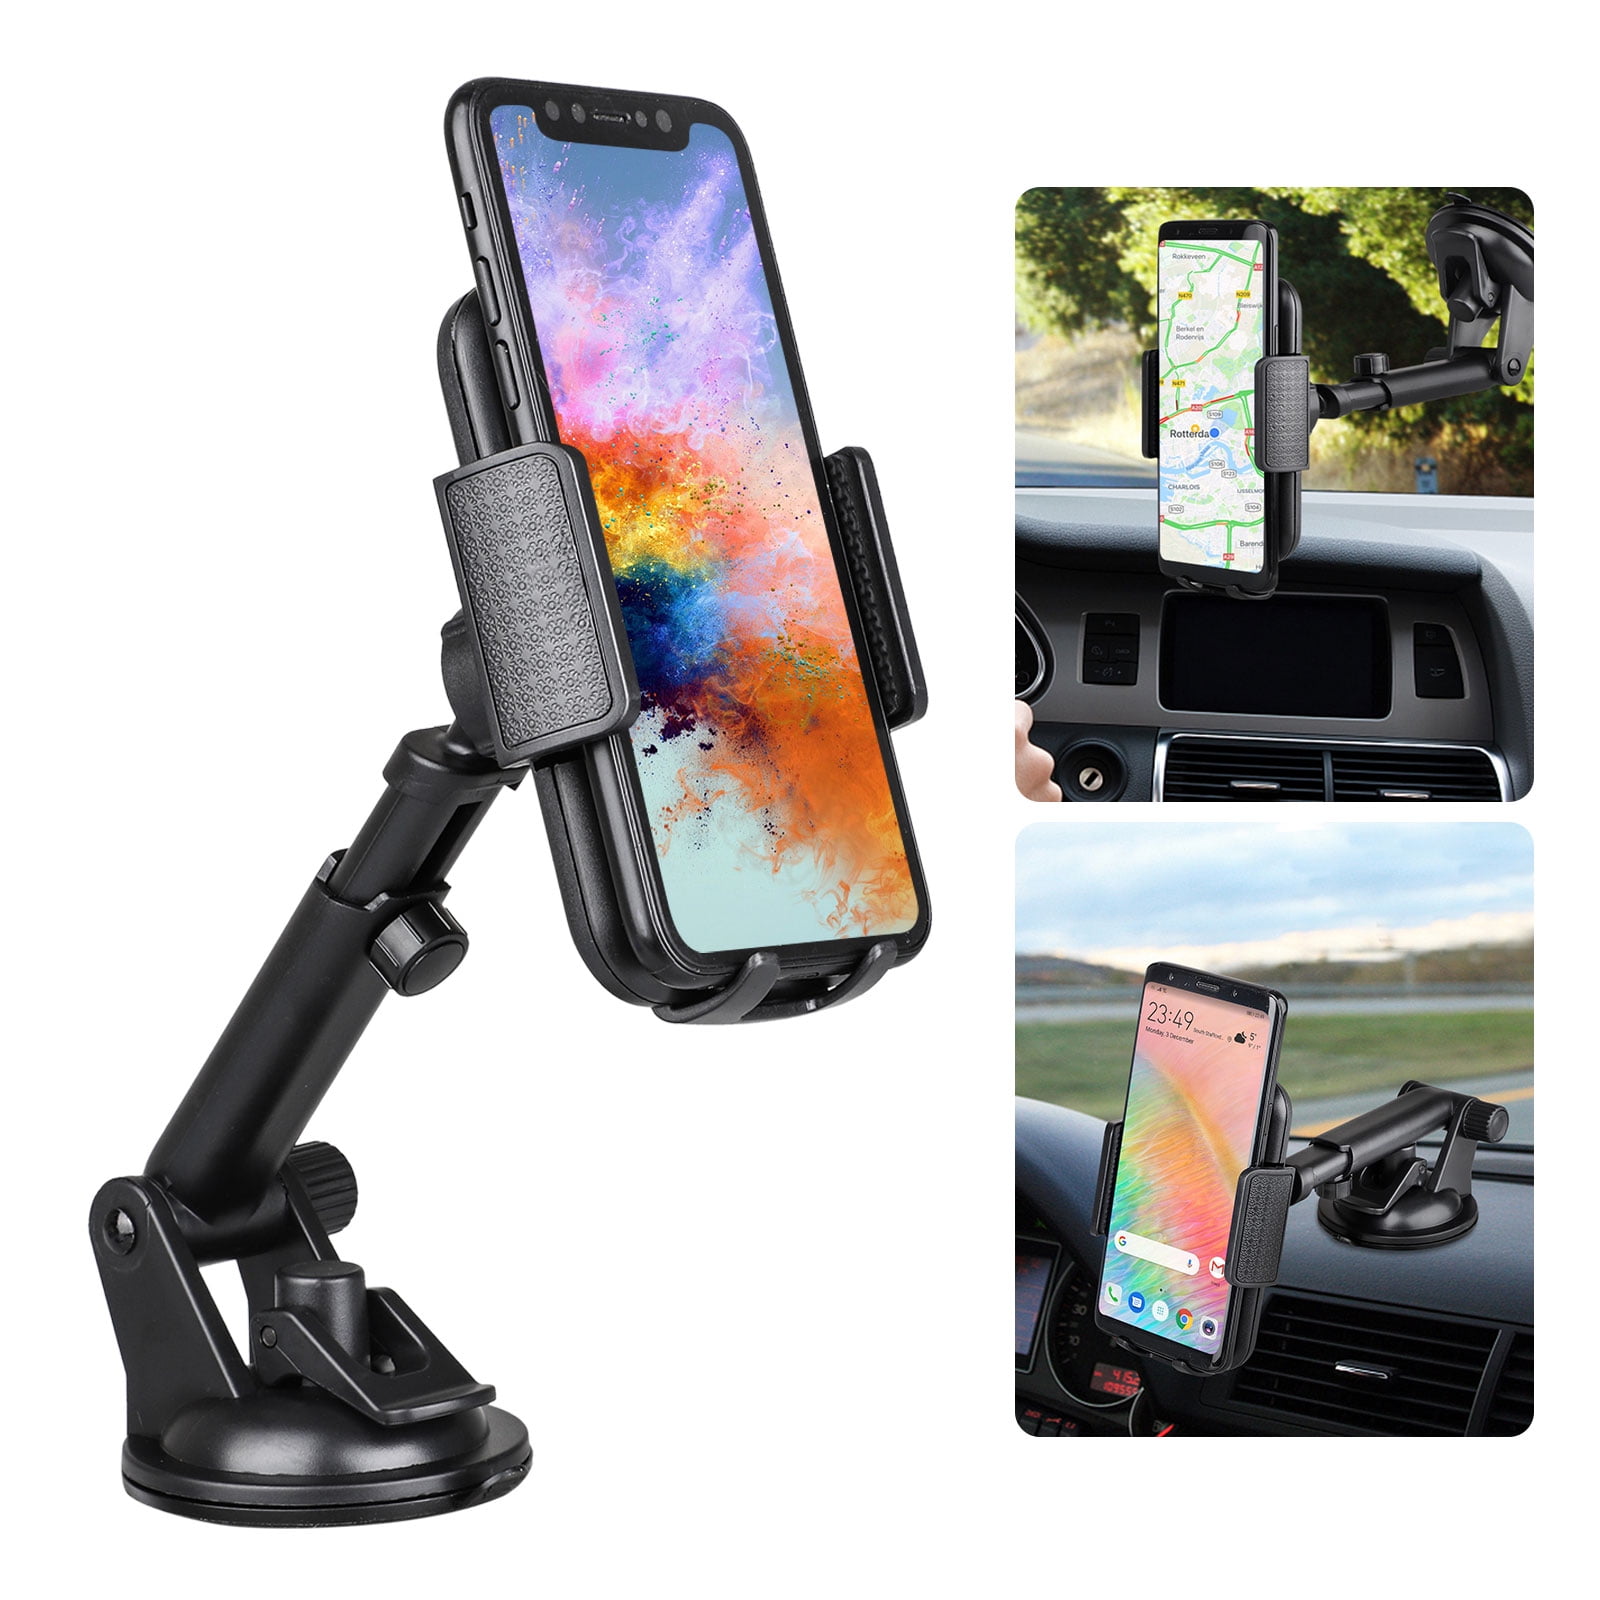 GRUNDIG Car Phone Holder Mount Smartphone Car Air Vent Mount Holder Cradle Hands-Free Compatible for iPhone 12 11 Pro Samsung Galaxy S20 etc 